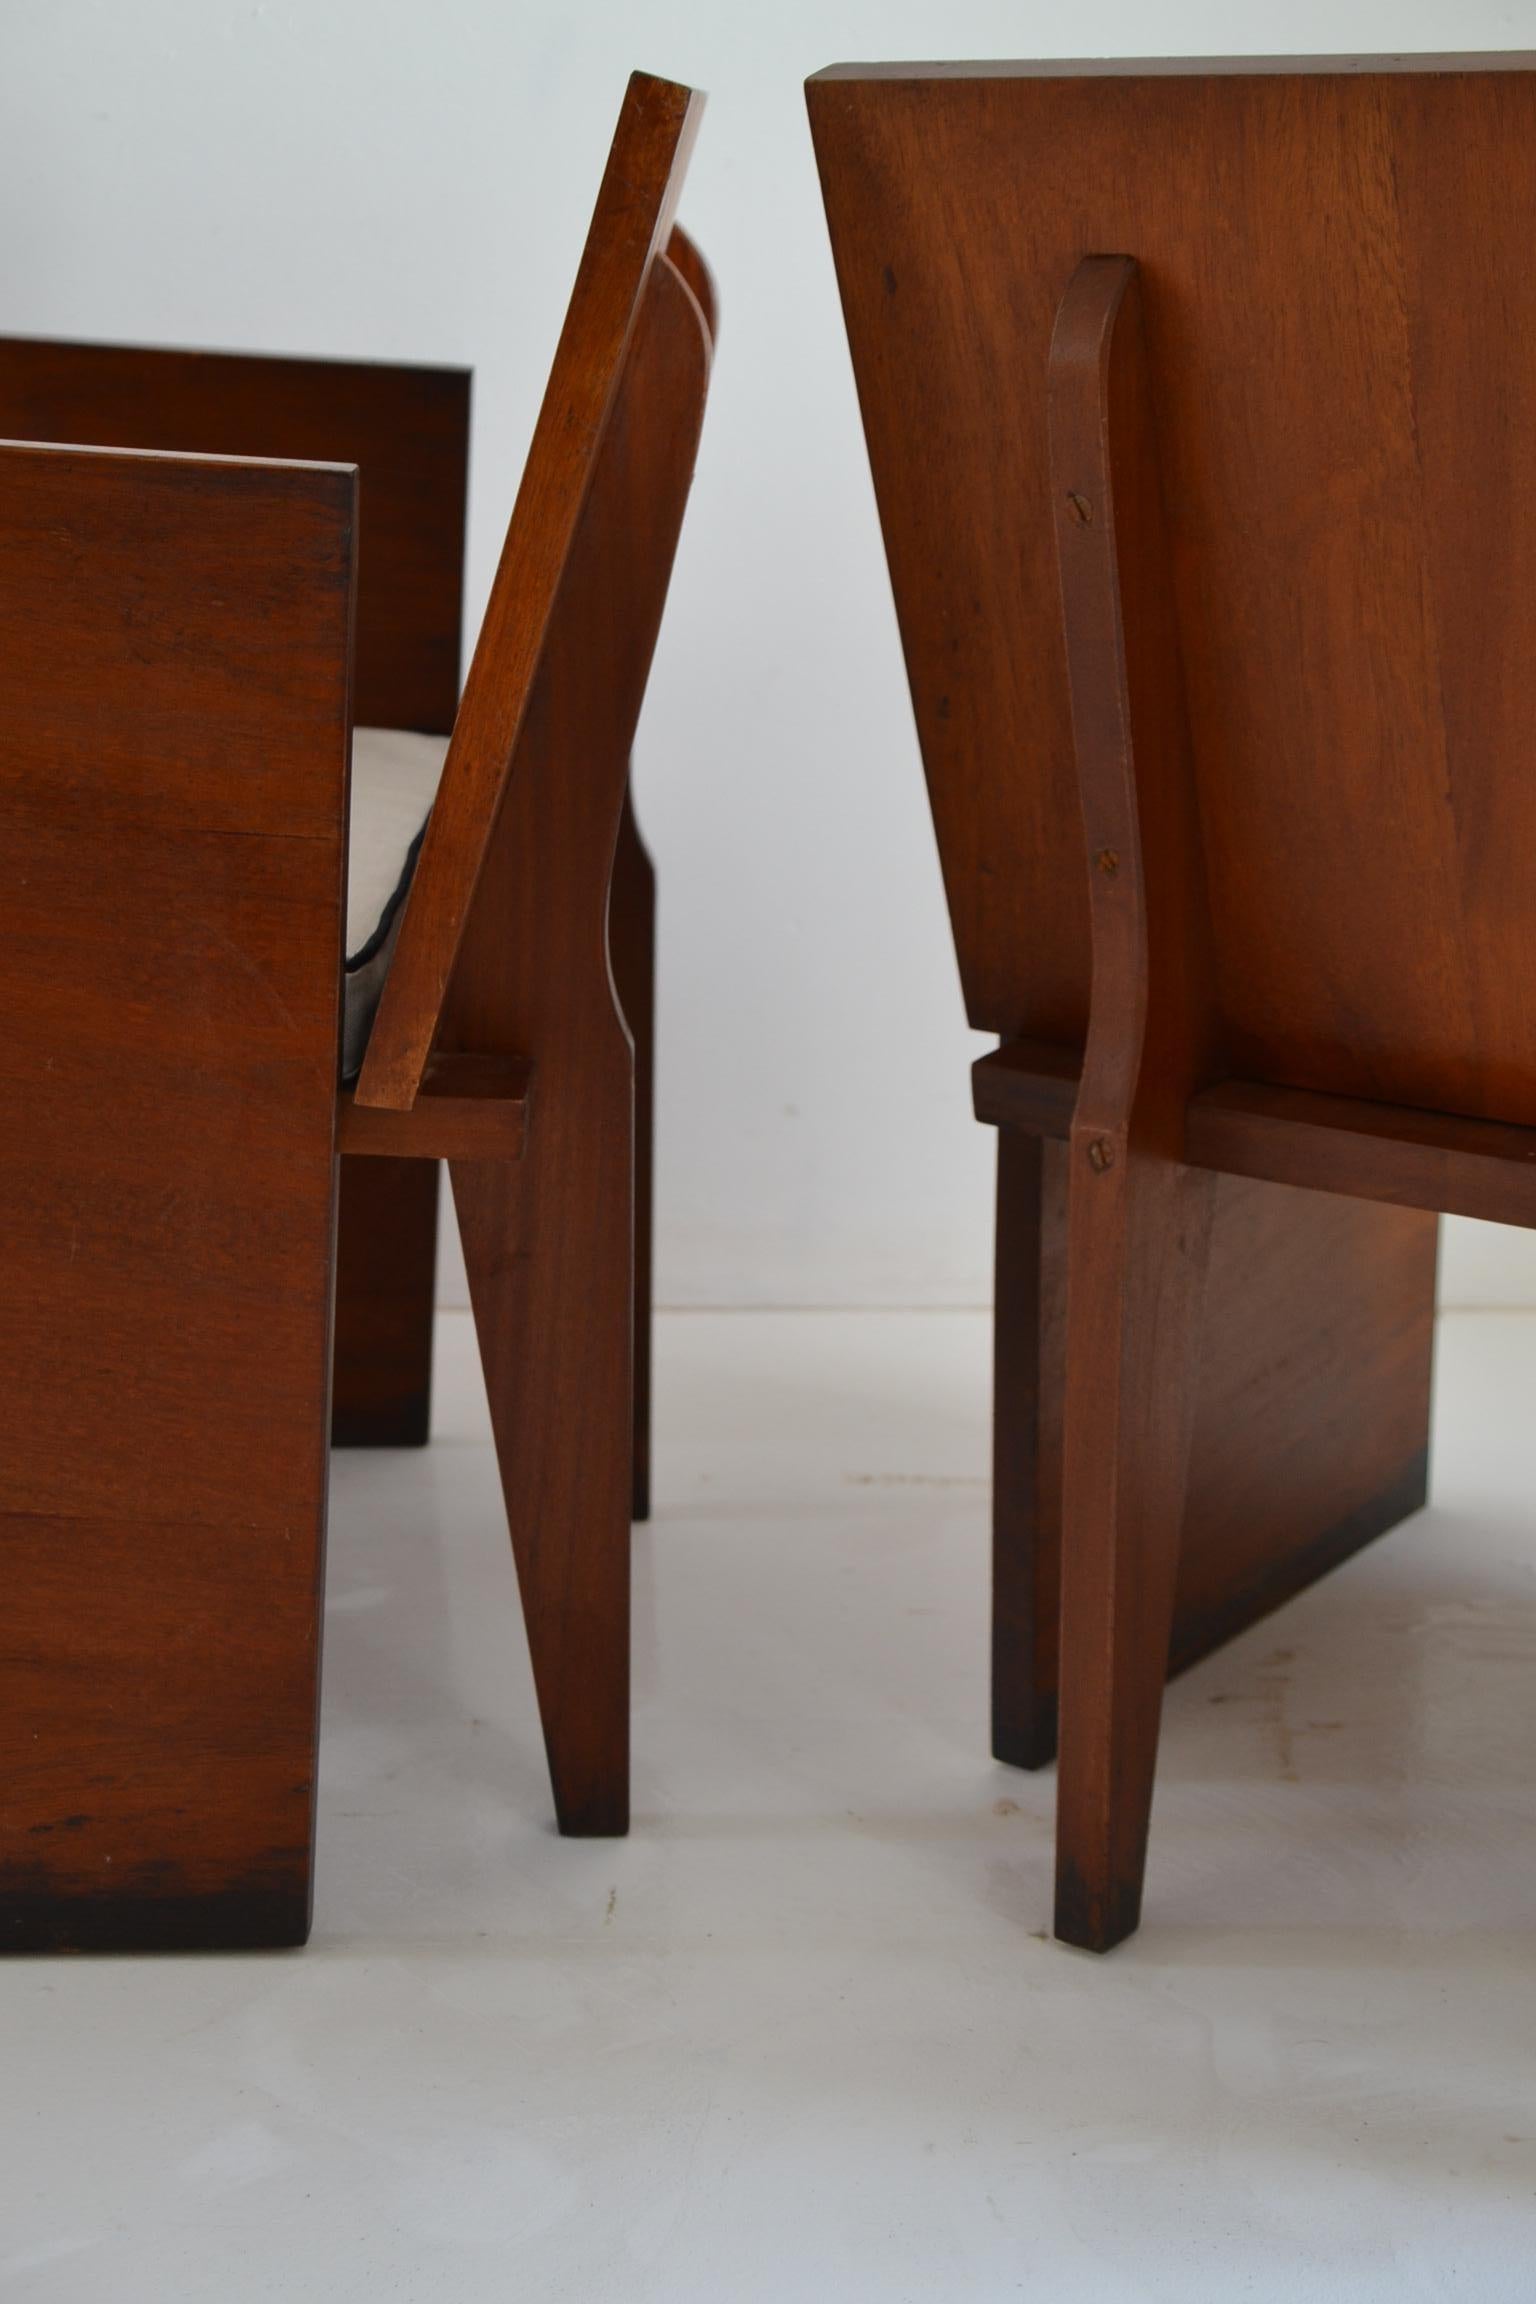 Pair of Brutalist Mahogany Chairs, Modernism 2